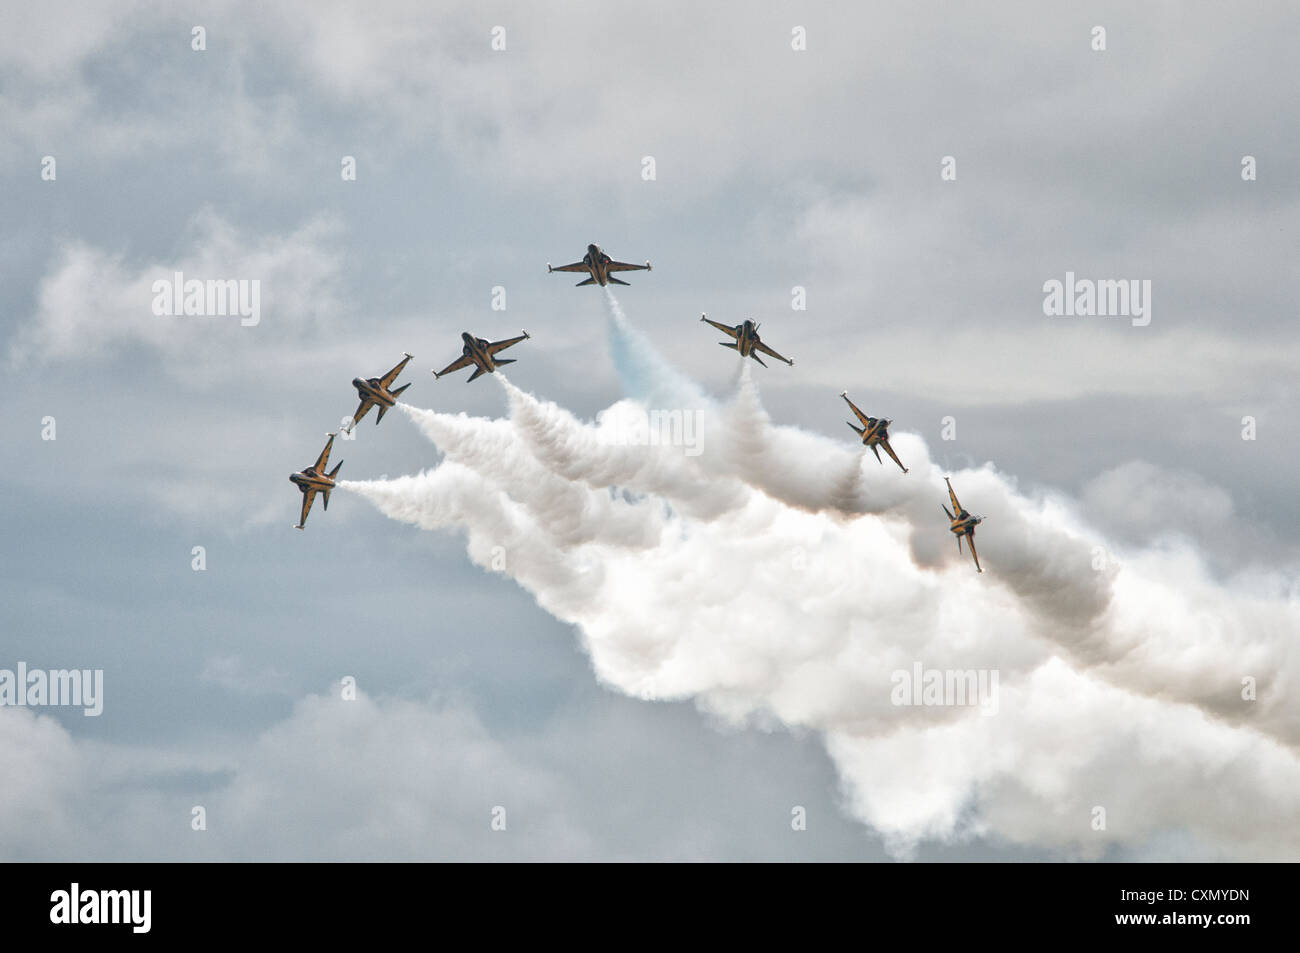 The Black Eagles display team from South Korea perform a dynamic display of precision aerobatics in their Korean T50B Jets Stock Photo